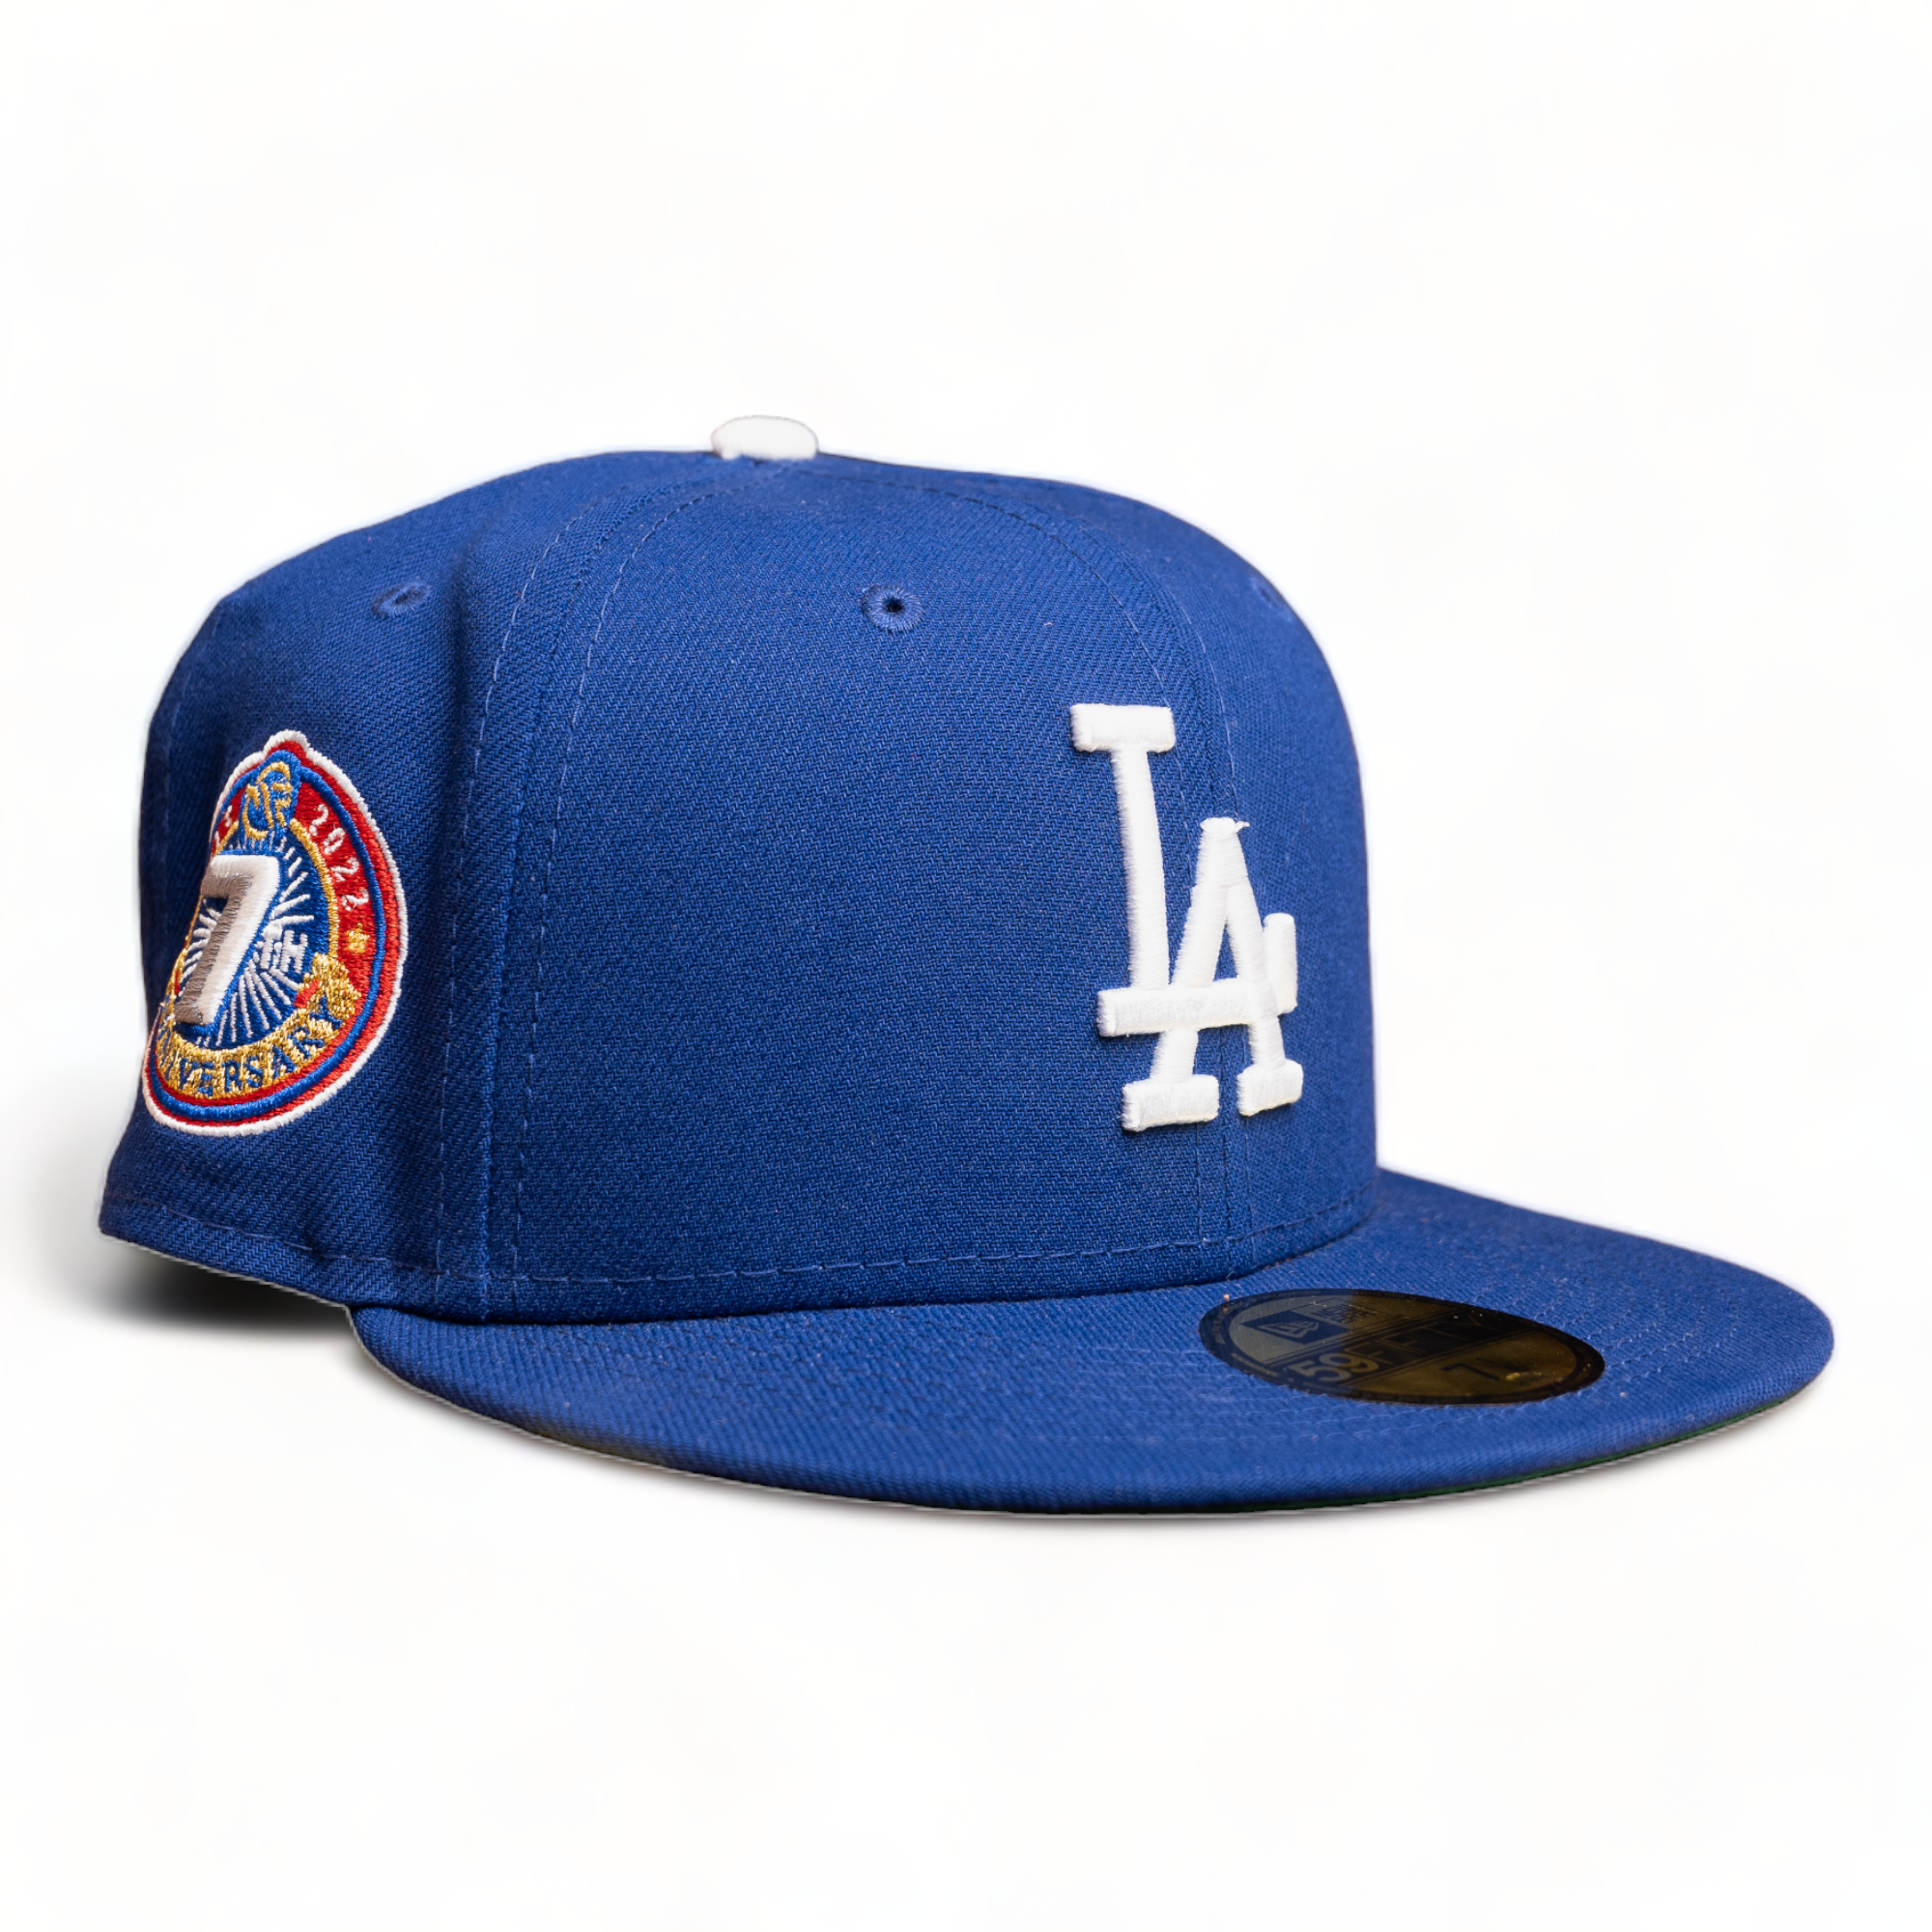 New Era x The Magnolia Park Not For Sale 7 Year Anniversary Fitted (Los Angeles Dodgers)